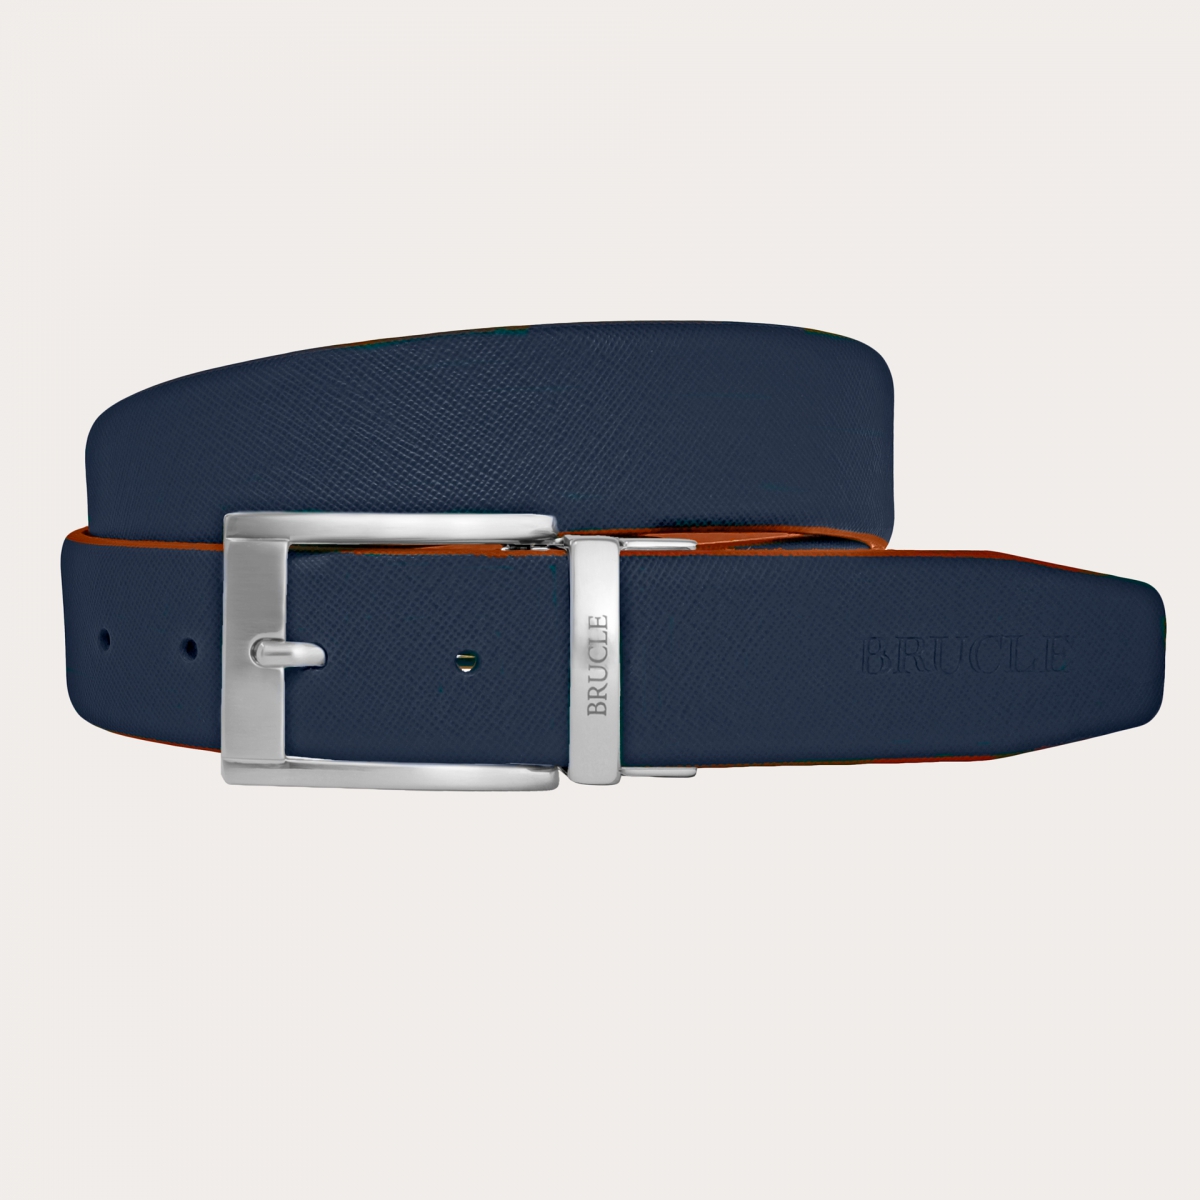 BRUCLE Reversible navy blue and leather belt